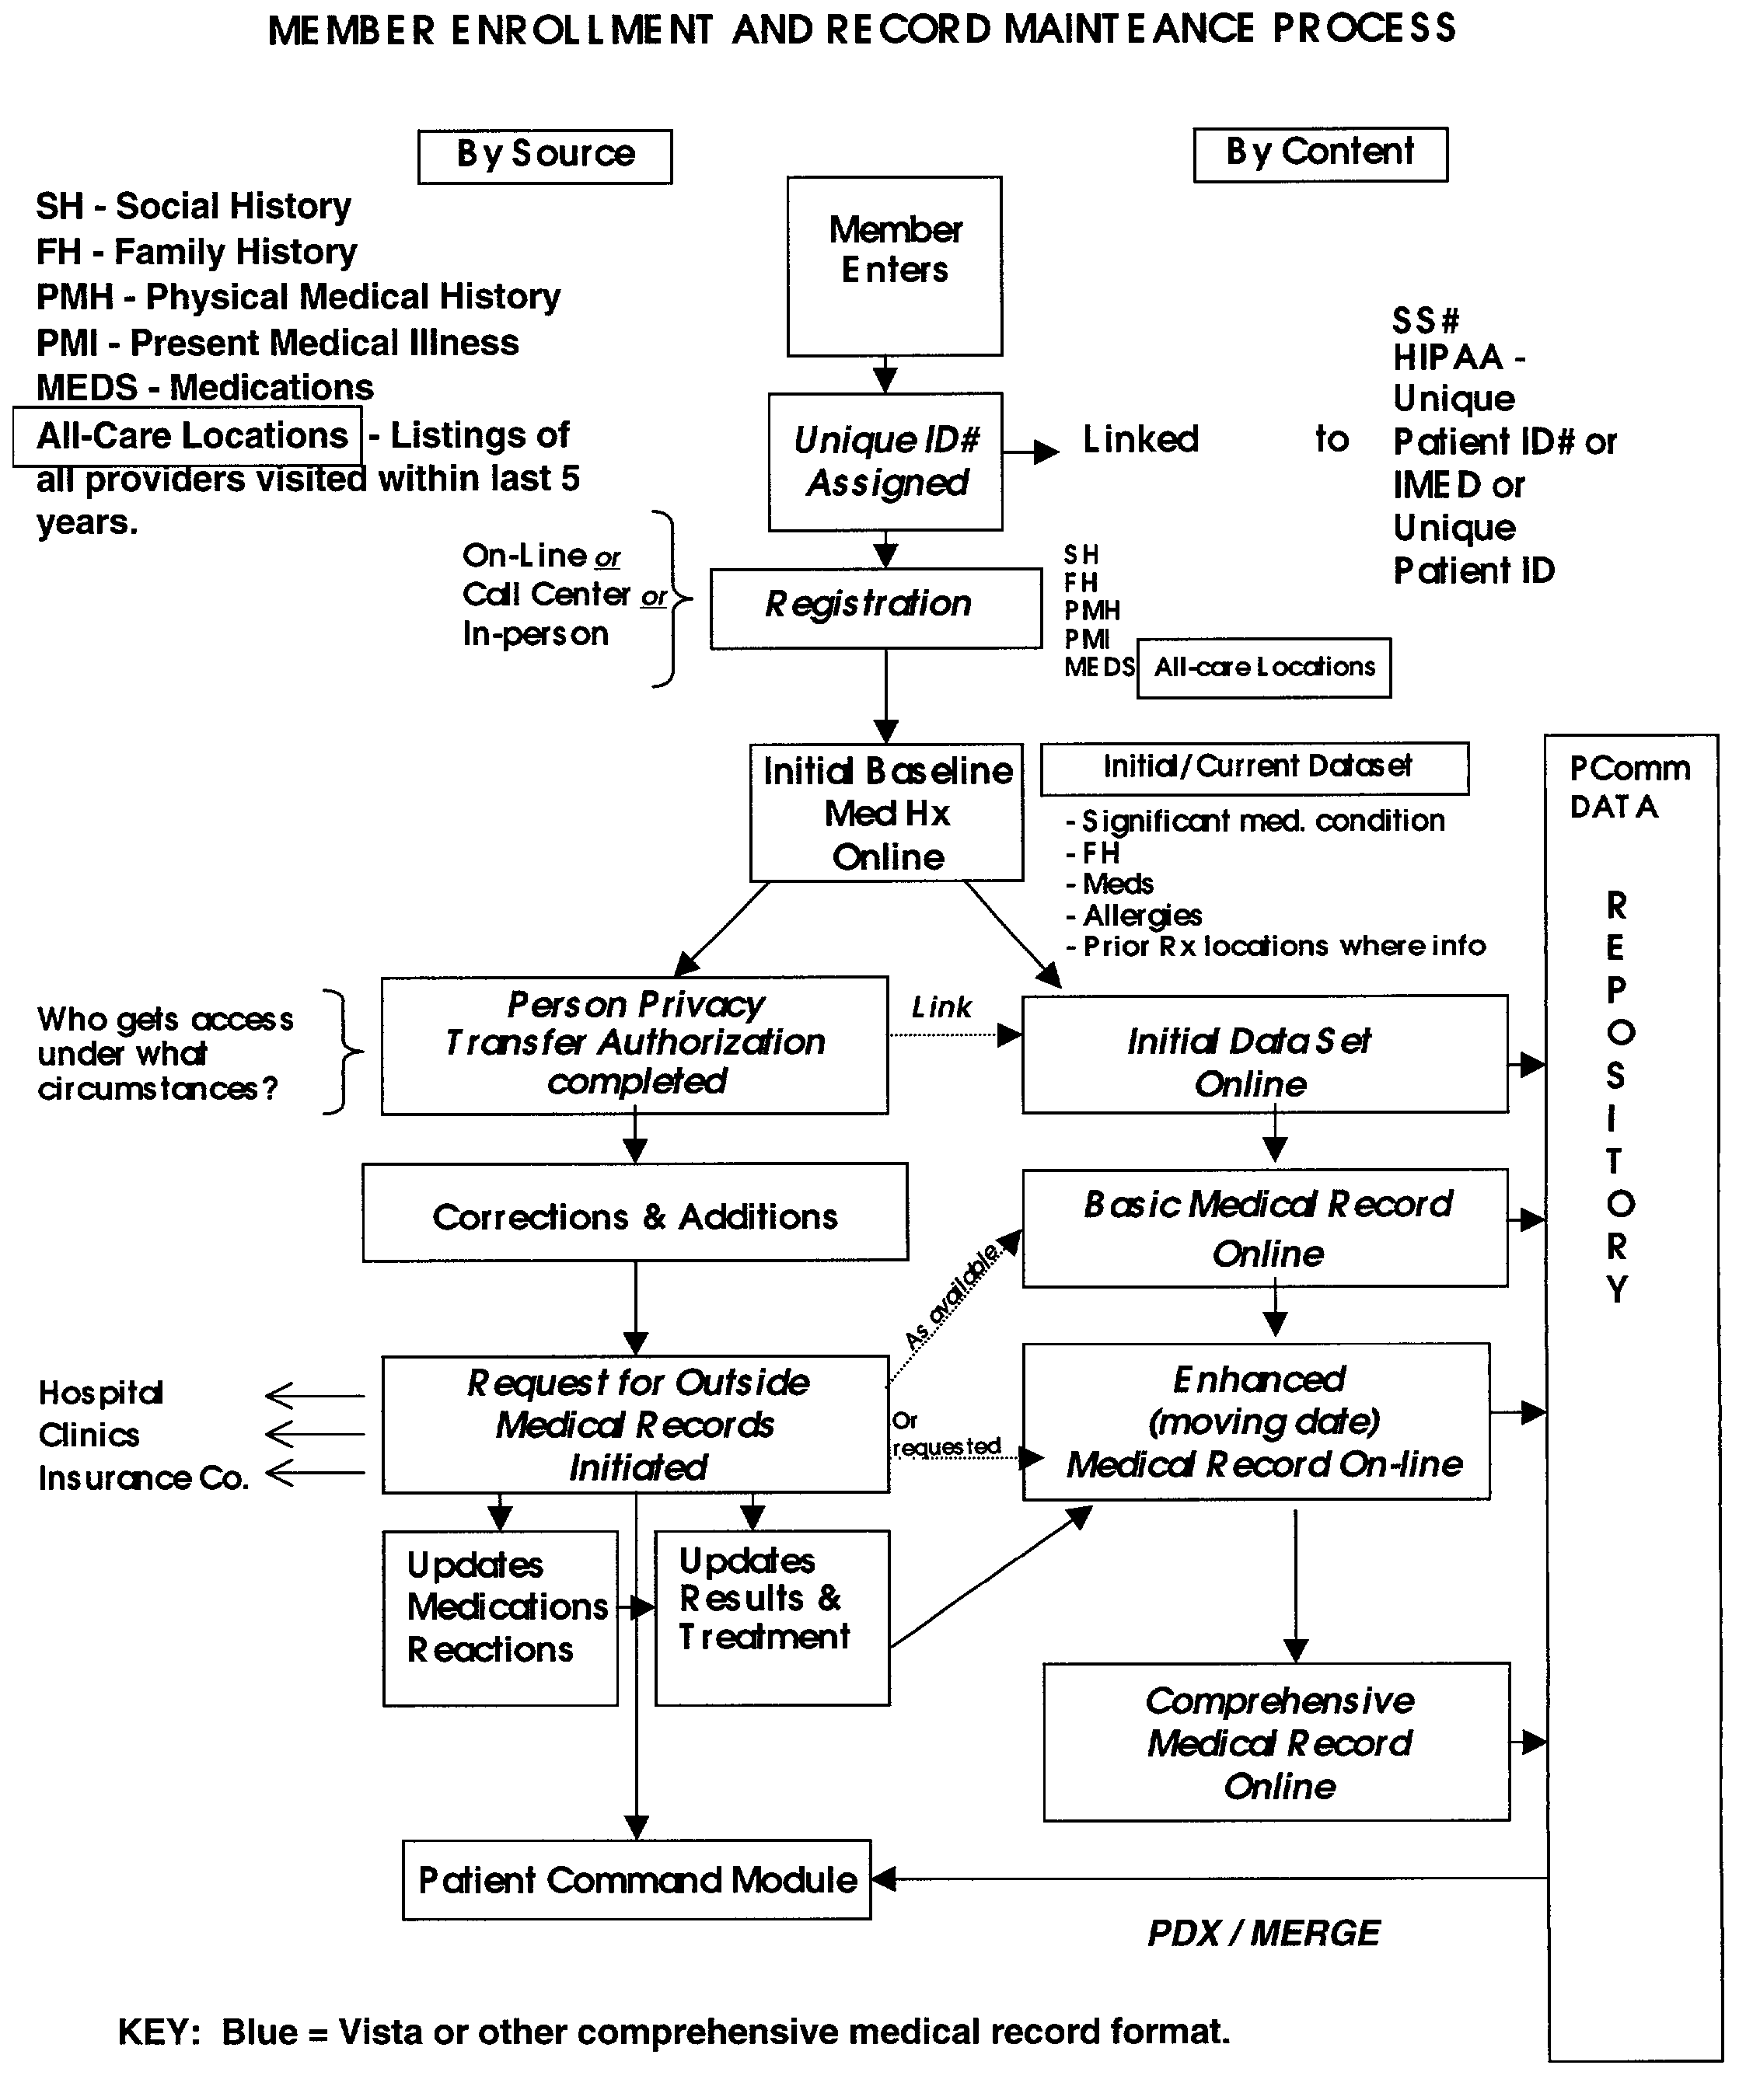 Broadband computer-based networked systems for control and management of medical records